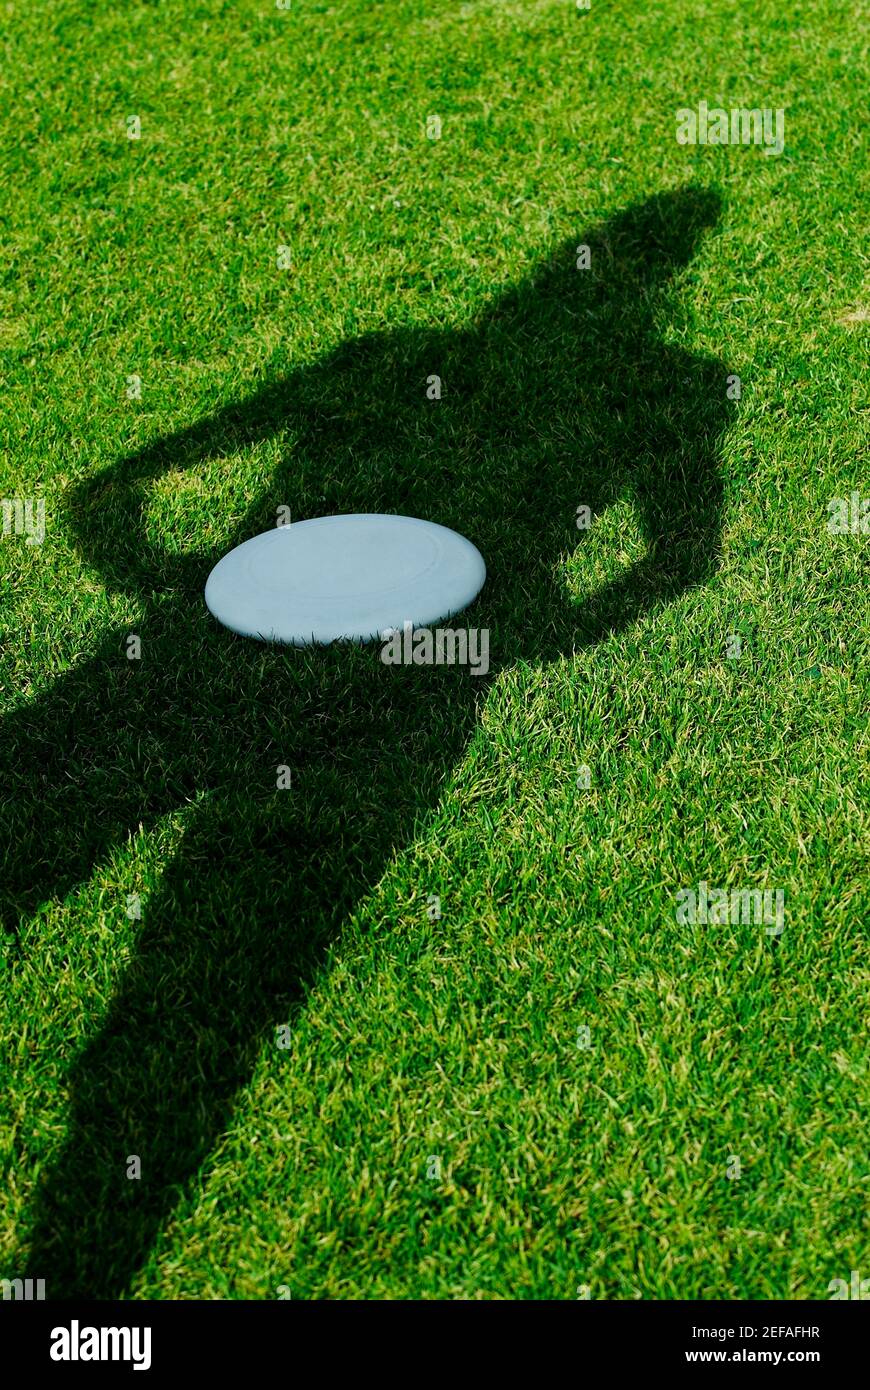 High angle view of a shadow of a person with a plastic disc in a park Stock Photo